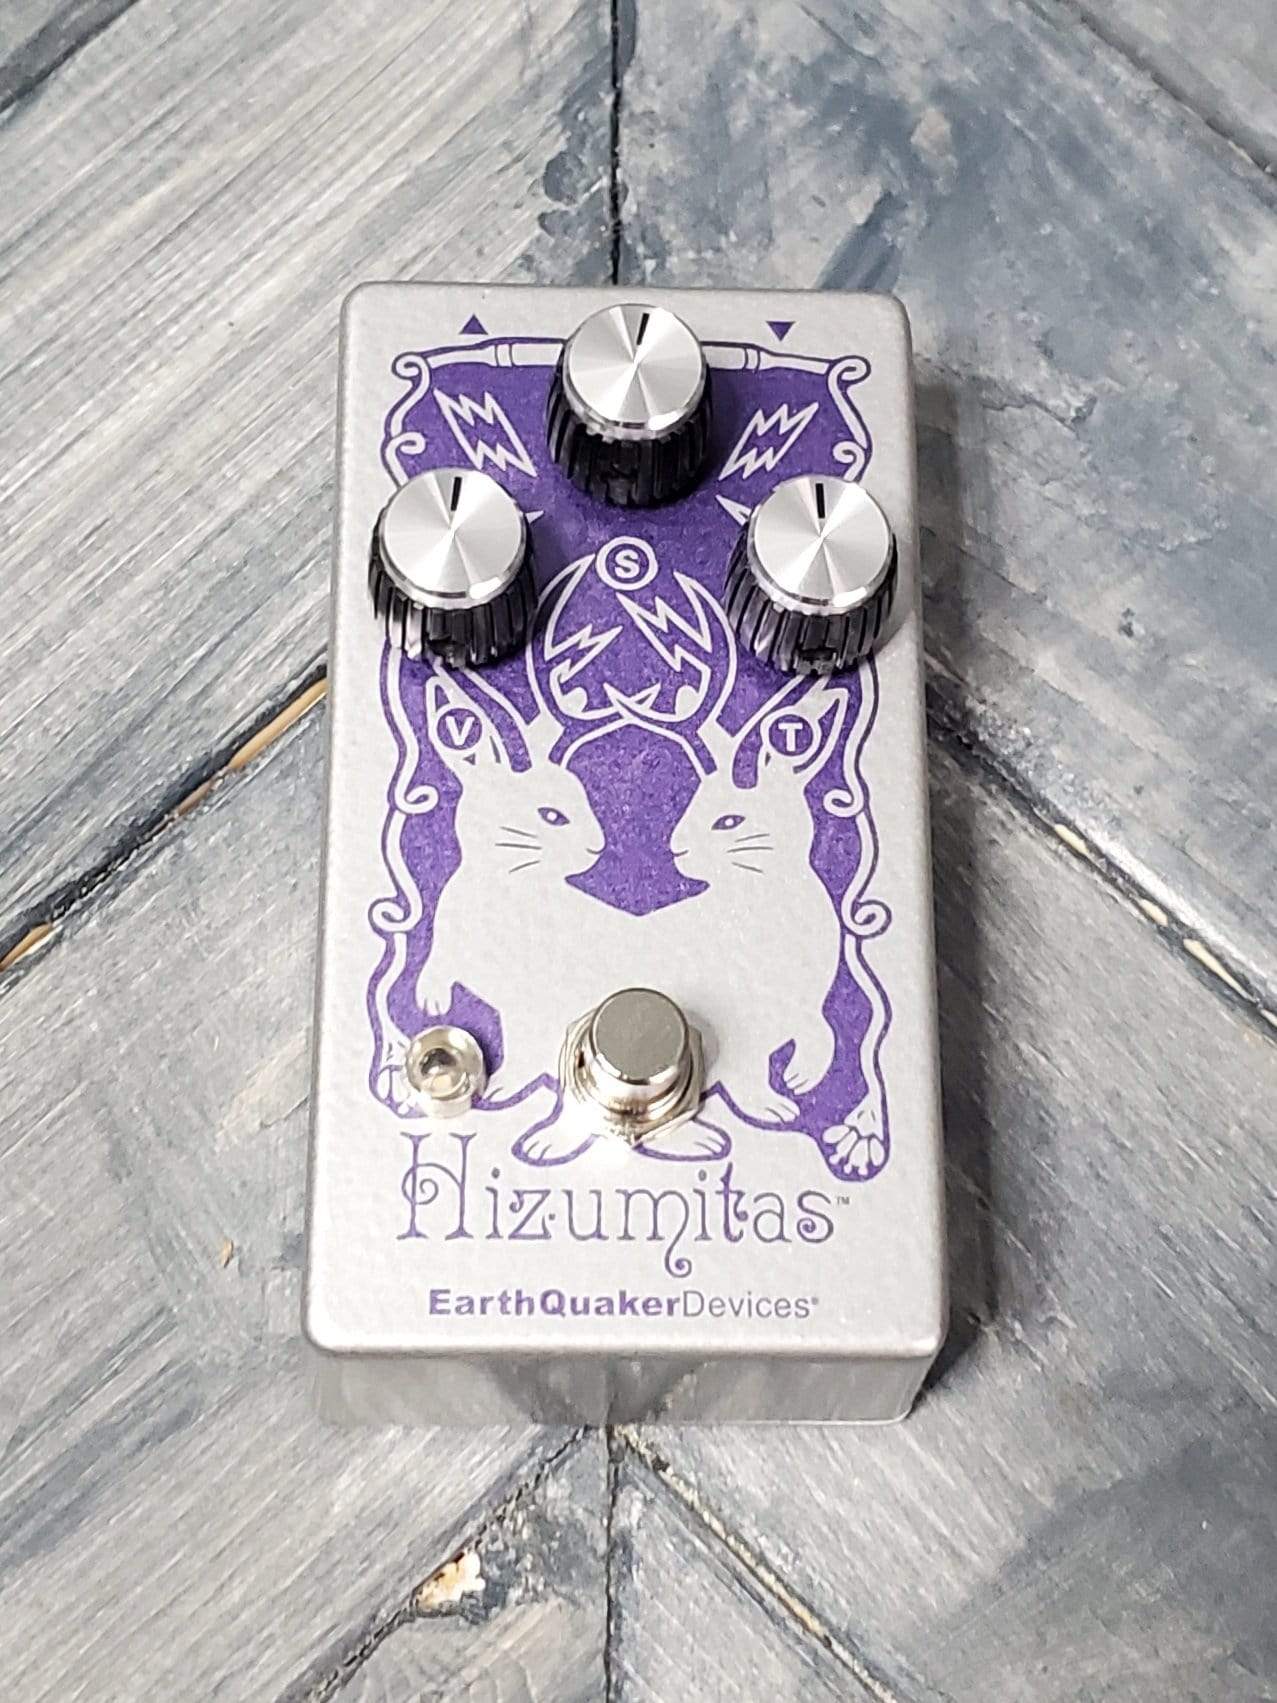 Earthquaker Devices Hizumitas Fuzz Sustainar Guitar Effects Pedal ギター